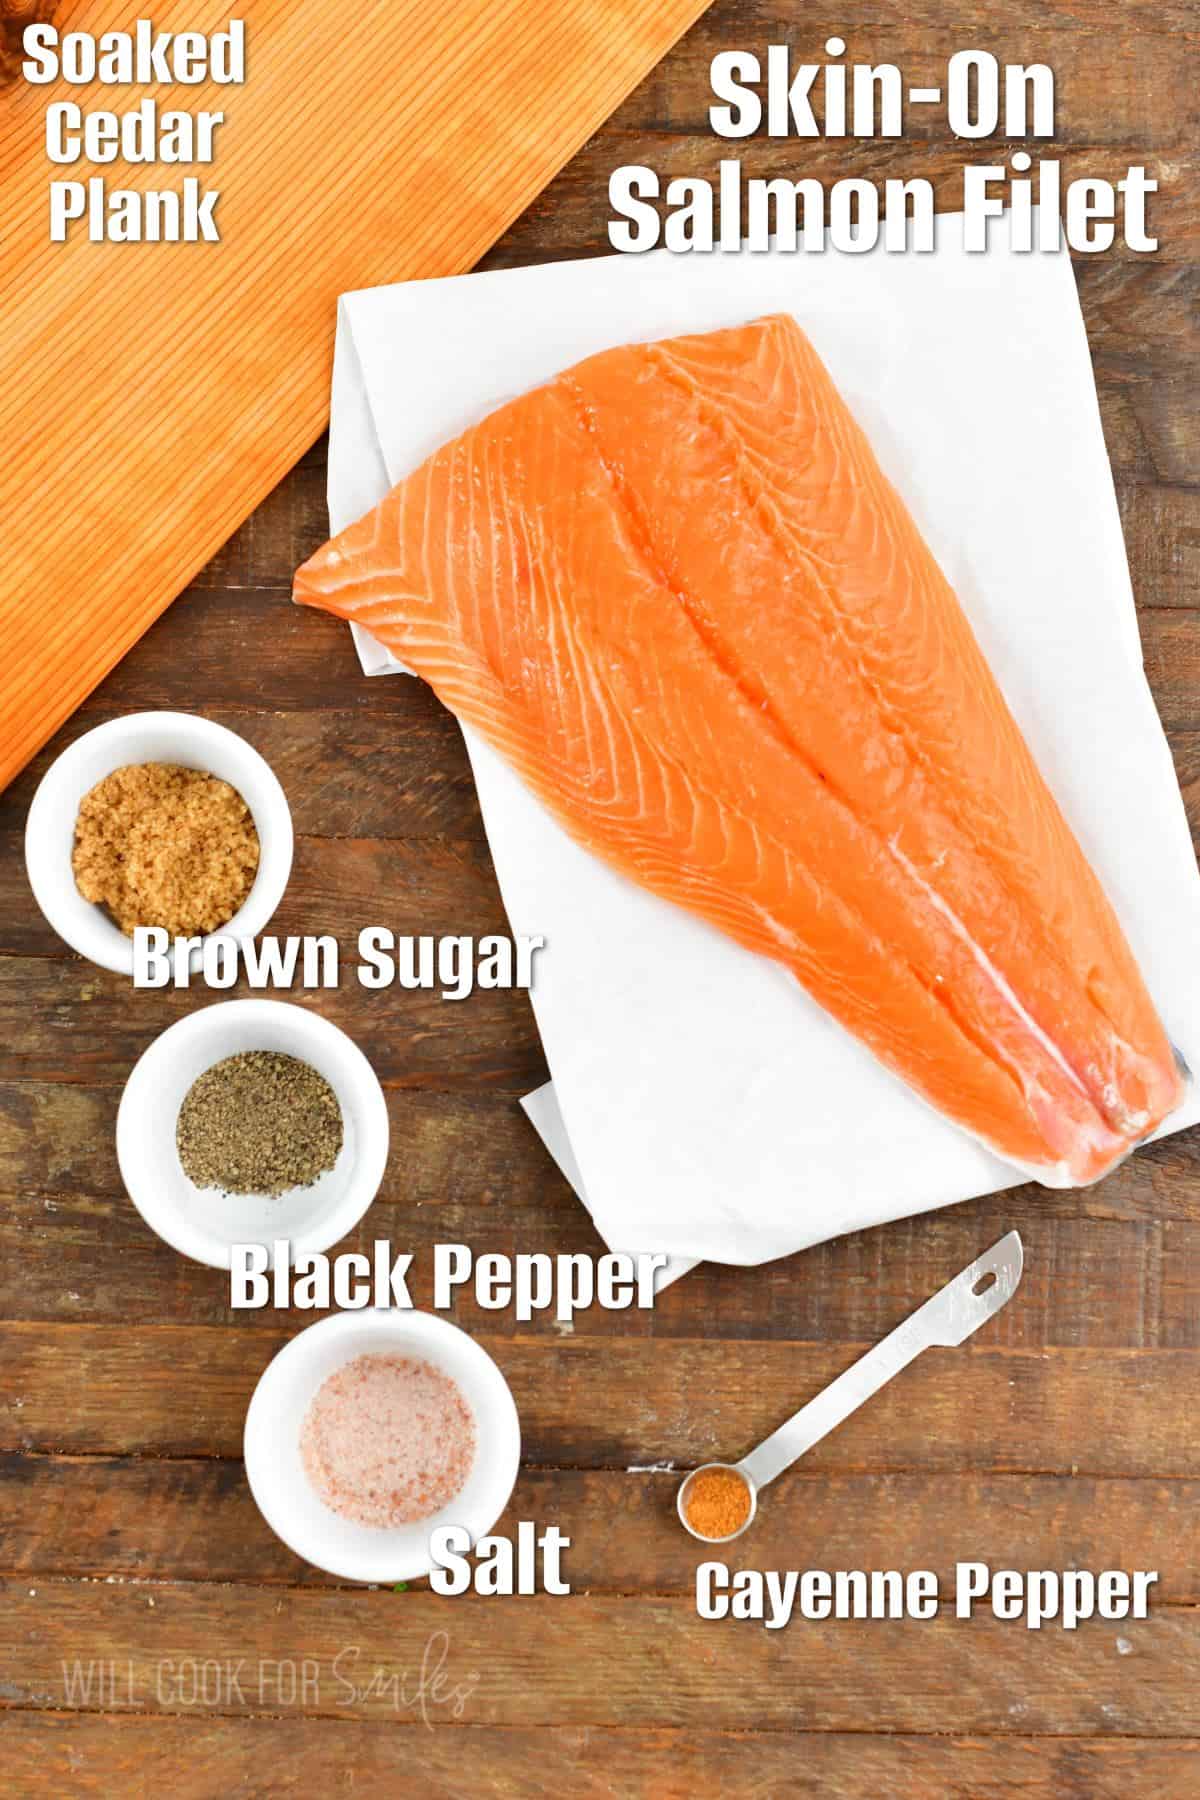 The ingredients for cedar plank salmon are placed on a wooden surface. 